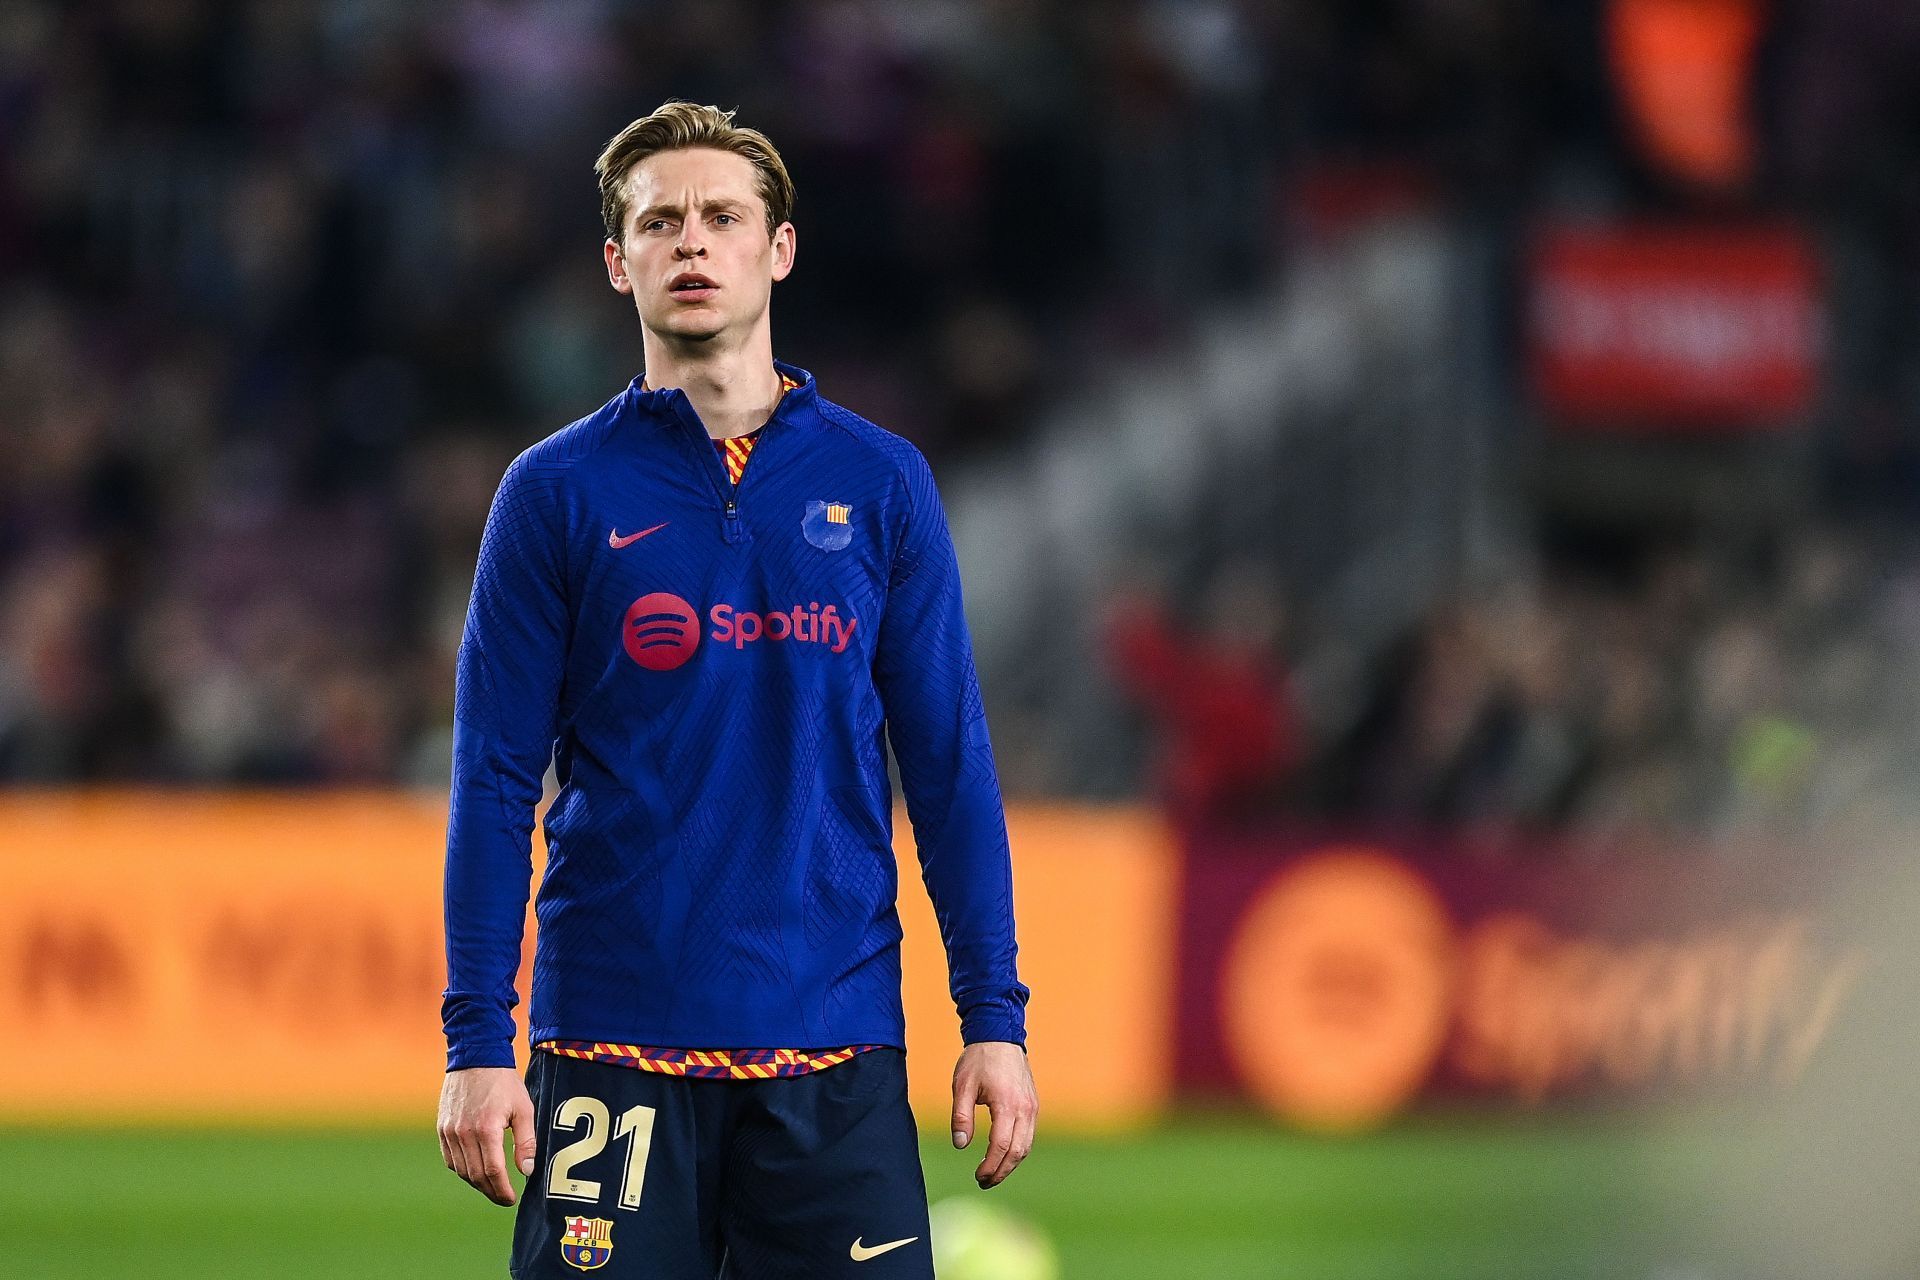 Frenkie de Jong may still be a target for the Red Devils.